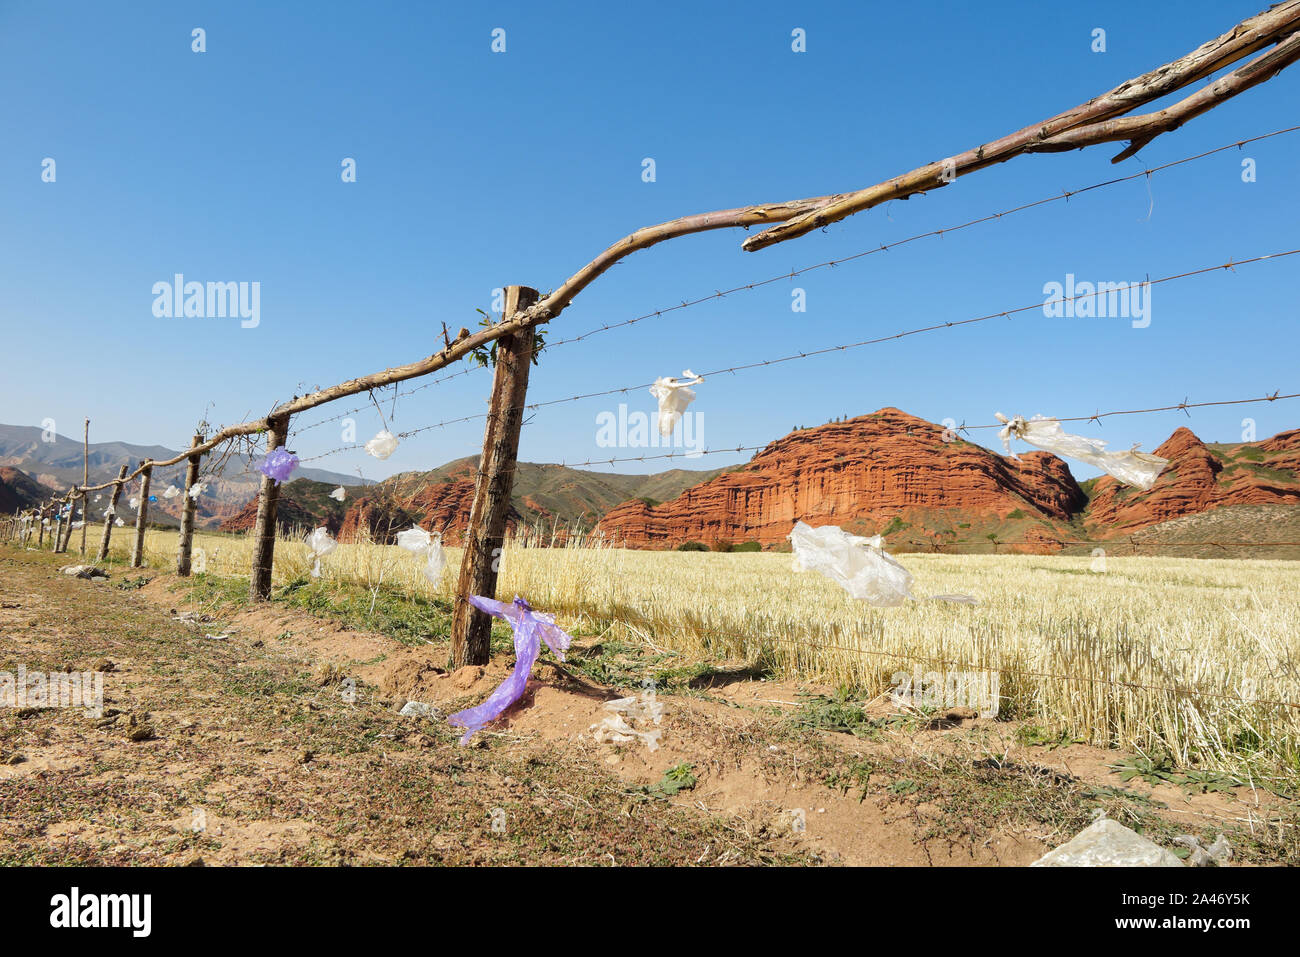 A plastic trash hanging on a field fence in Jety Ogyz, Kyrgyzstan Stock Photo